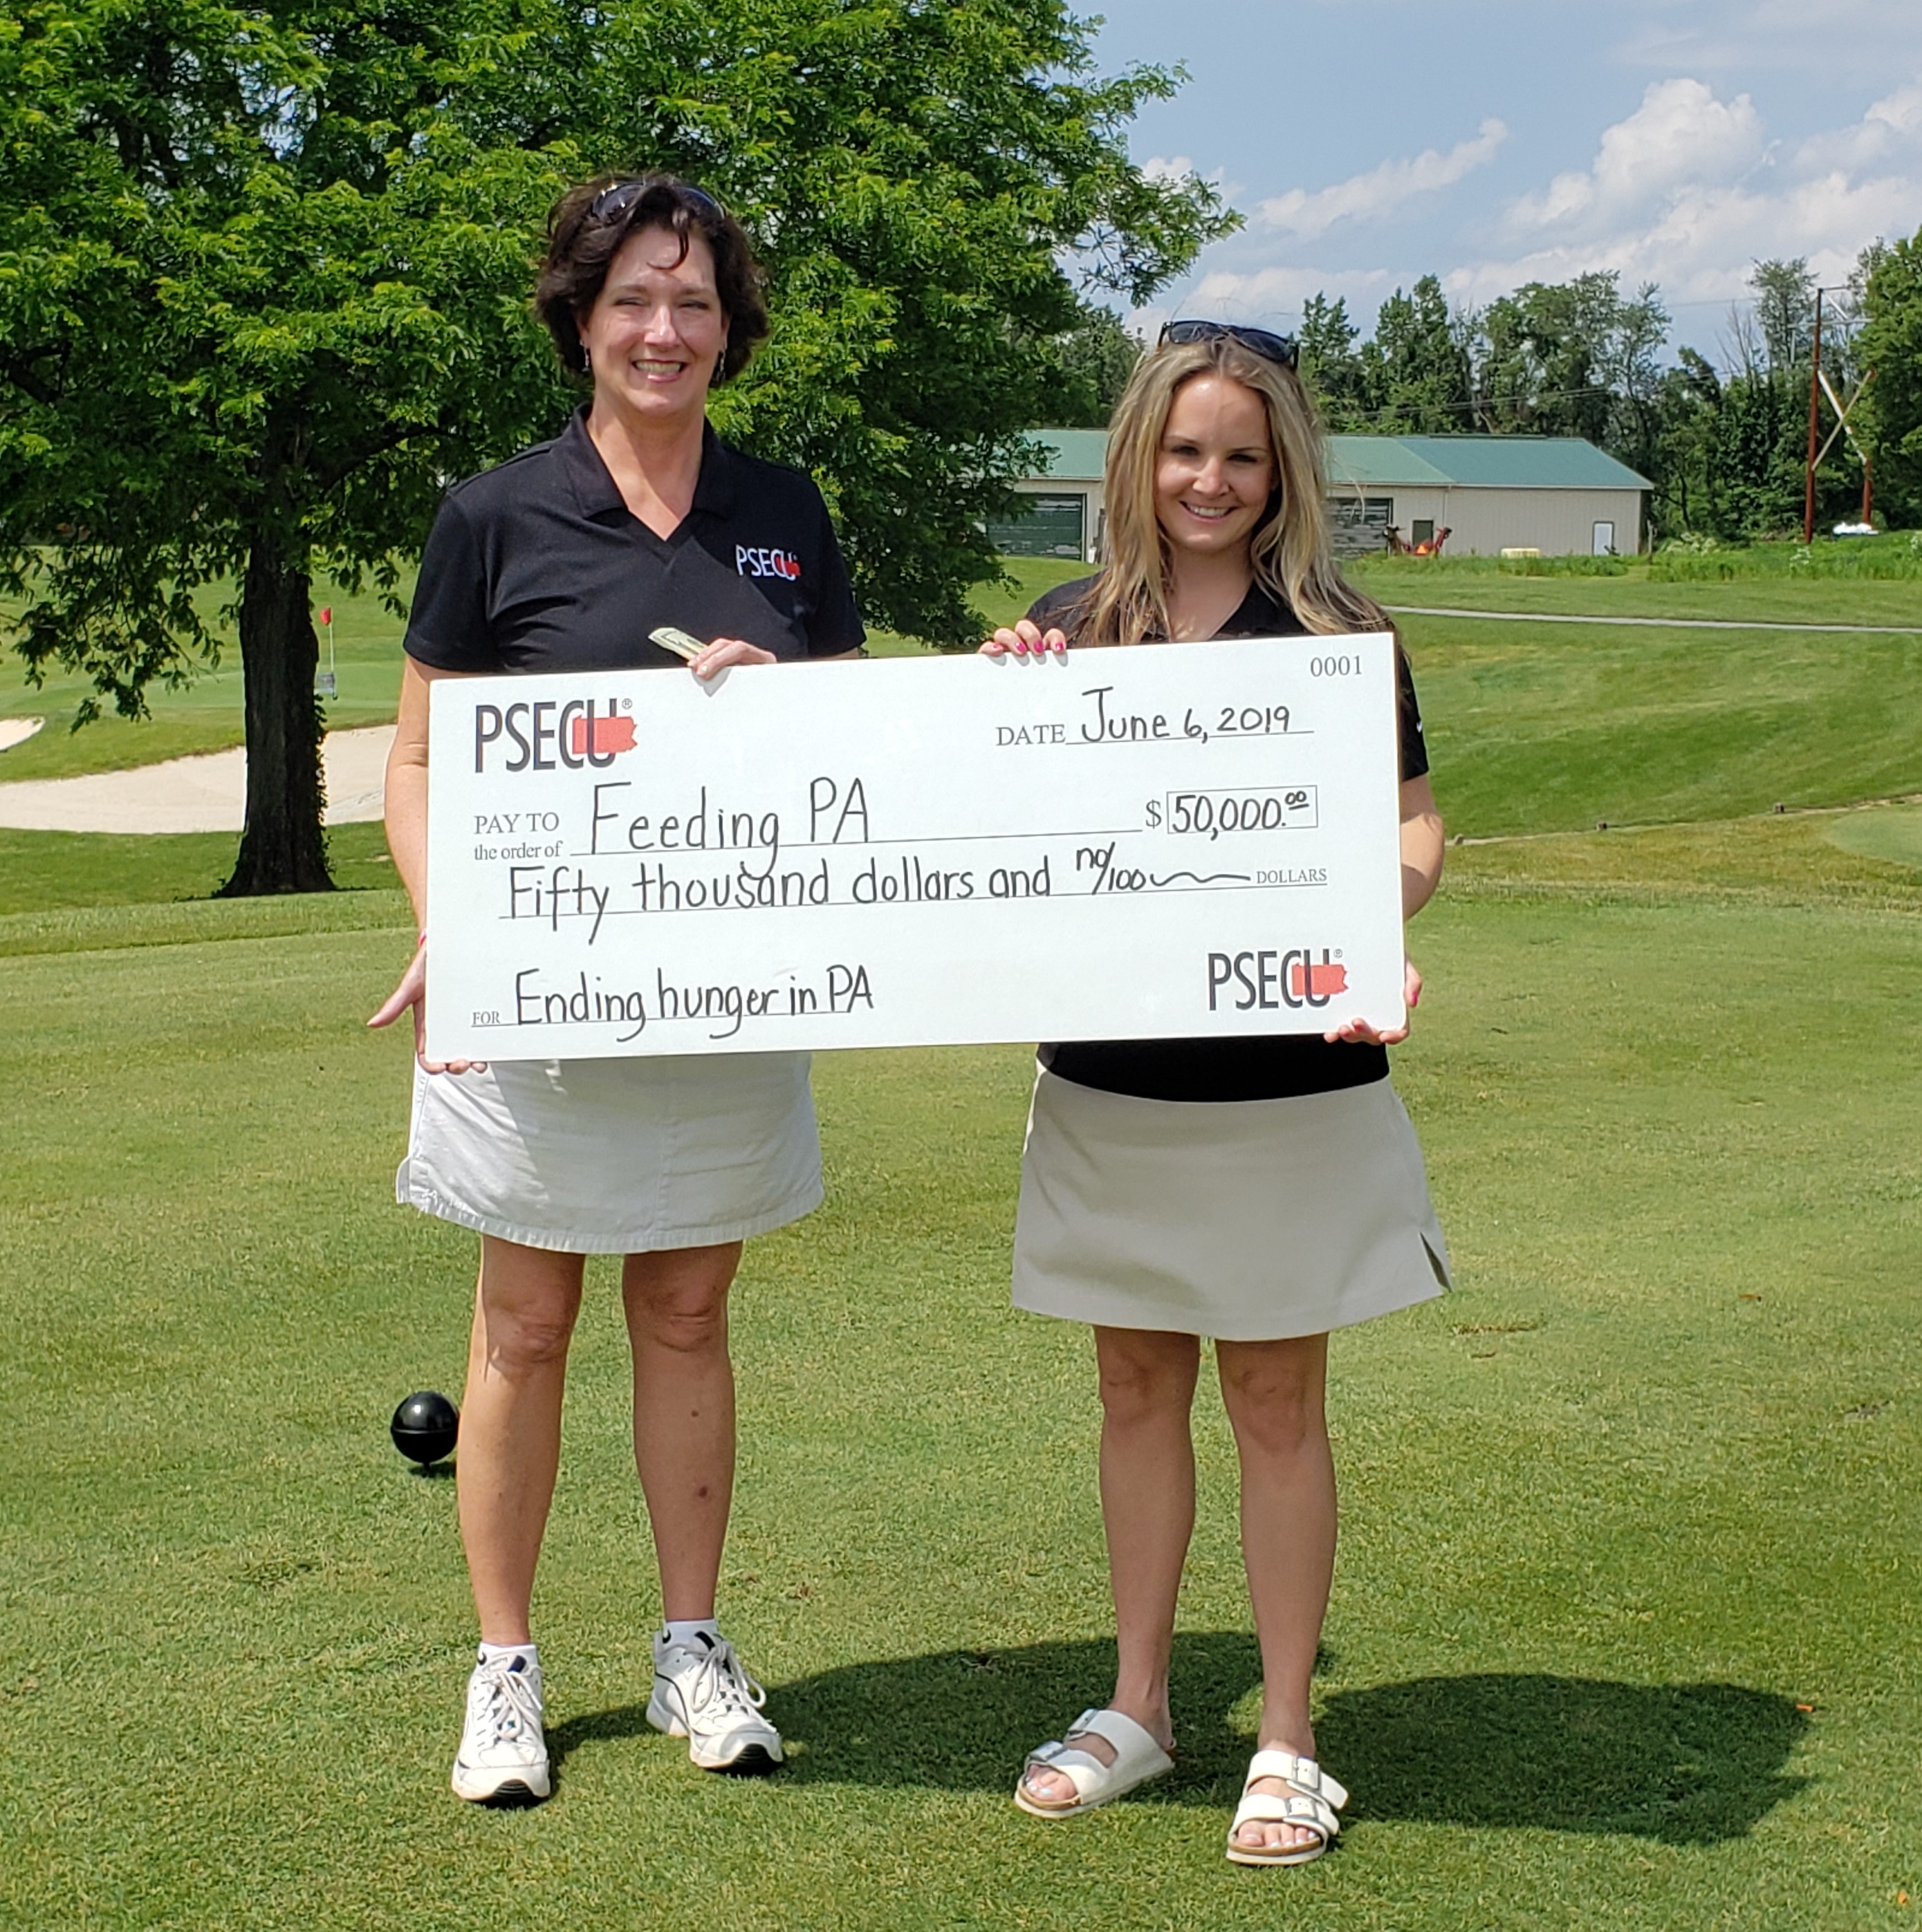 Barb Bowker, PSECU Vice President of Marketing and Membership Development (left), presents Jane Clements-Smith, Feeding Pennsylvania Executive Director (right), with a check for $50K at the 2019 PSECU Chips In Golf Outing on June 6.
